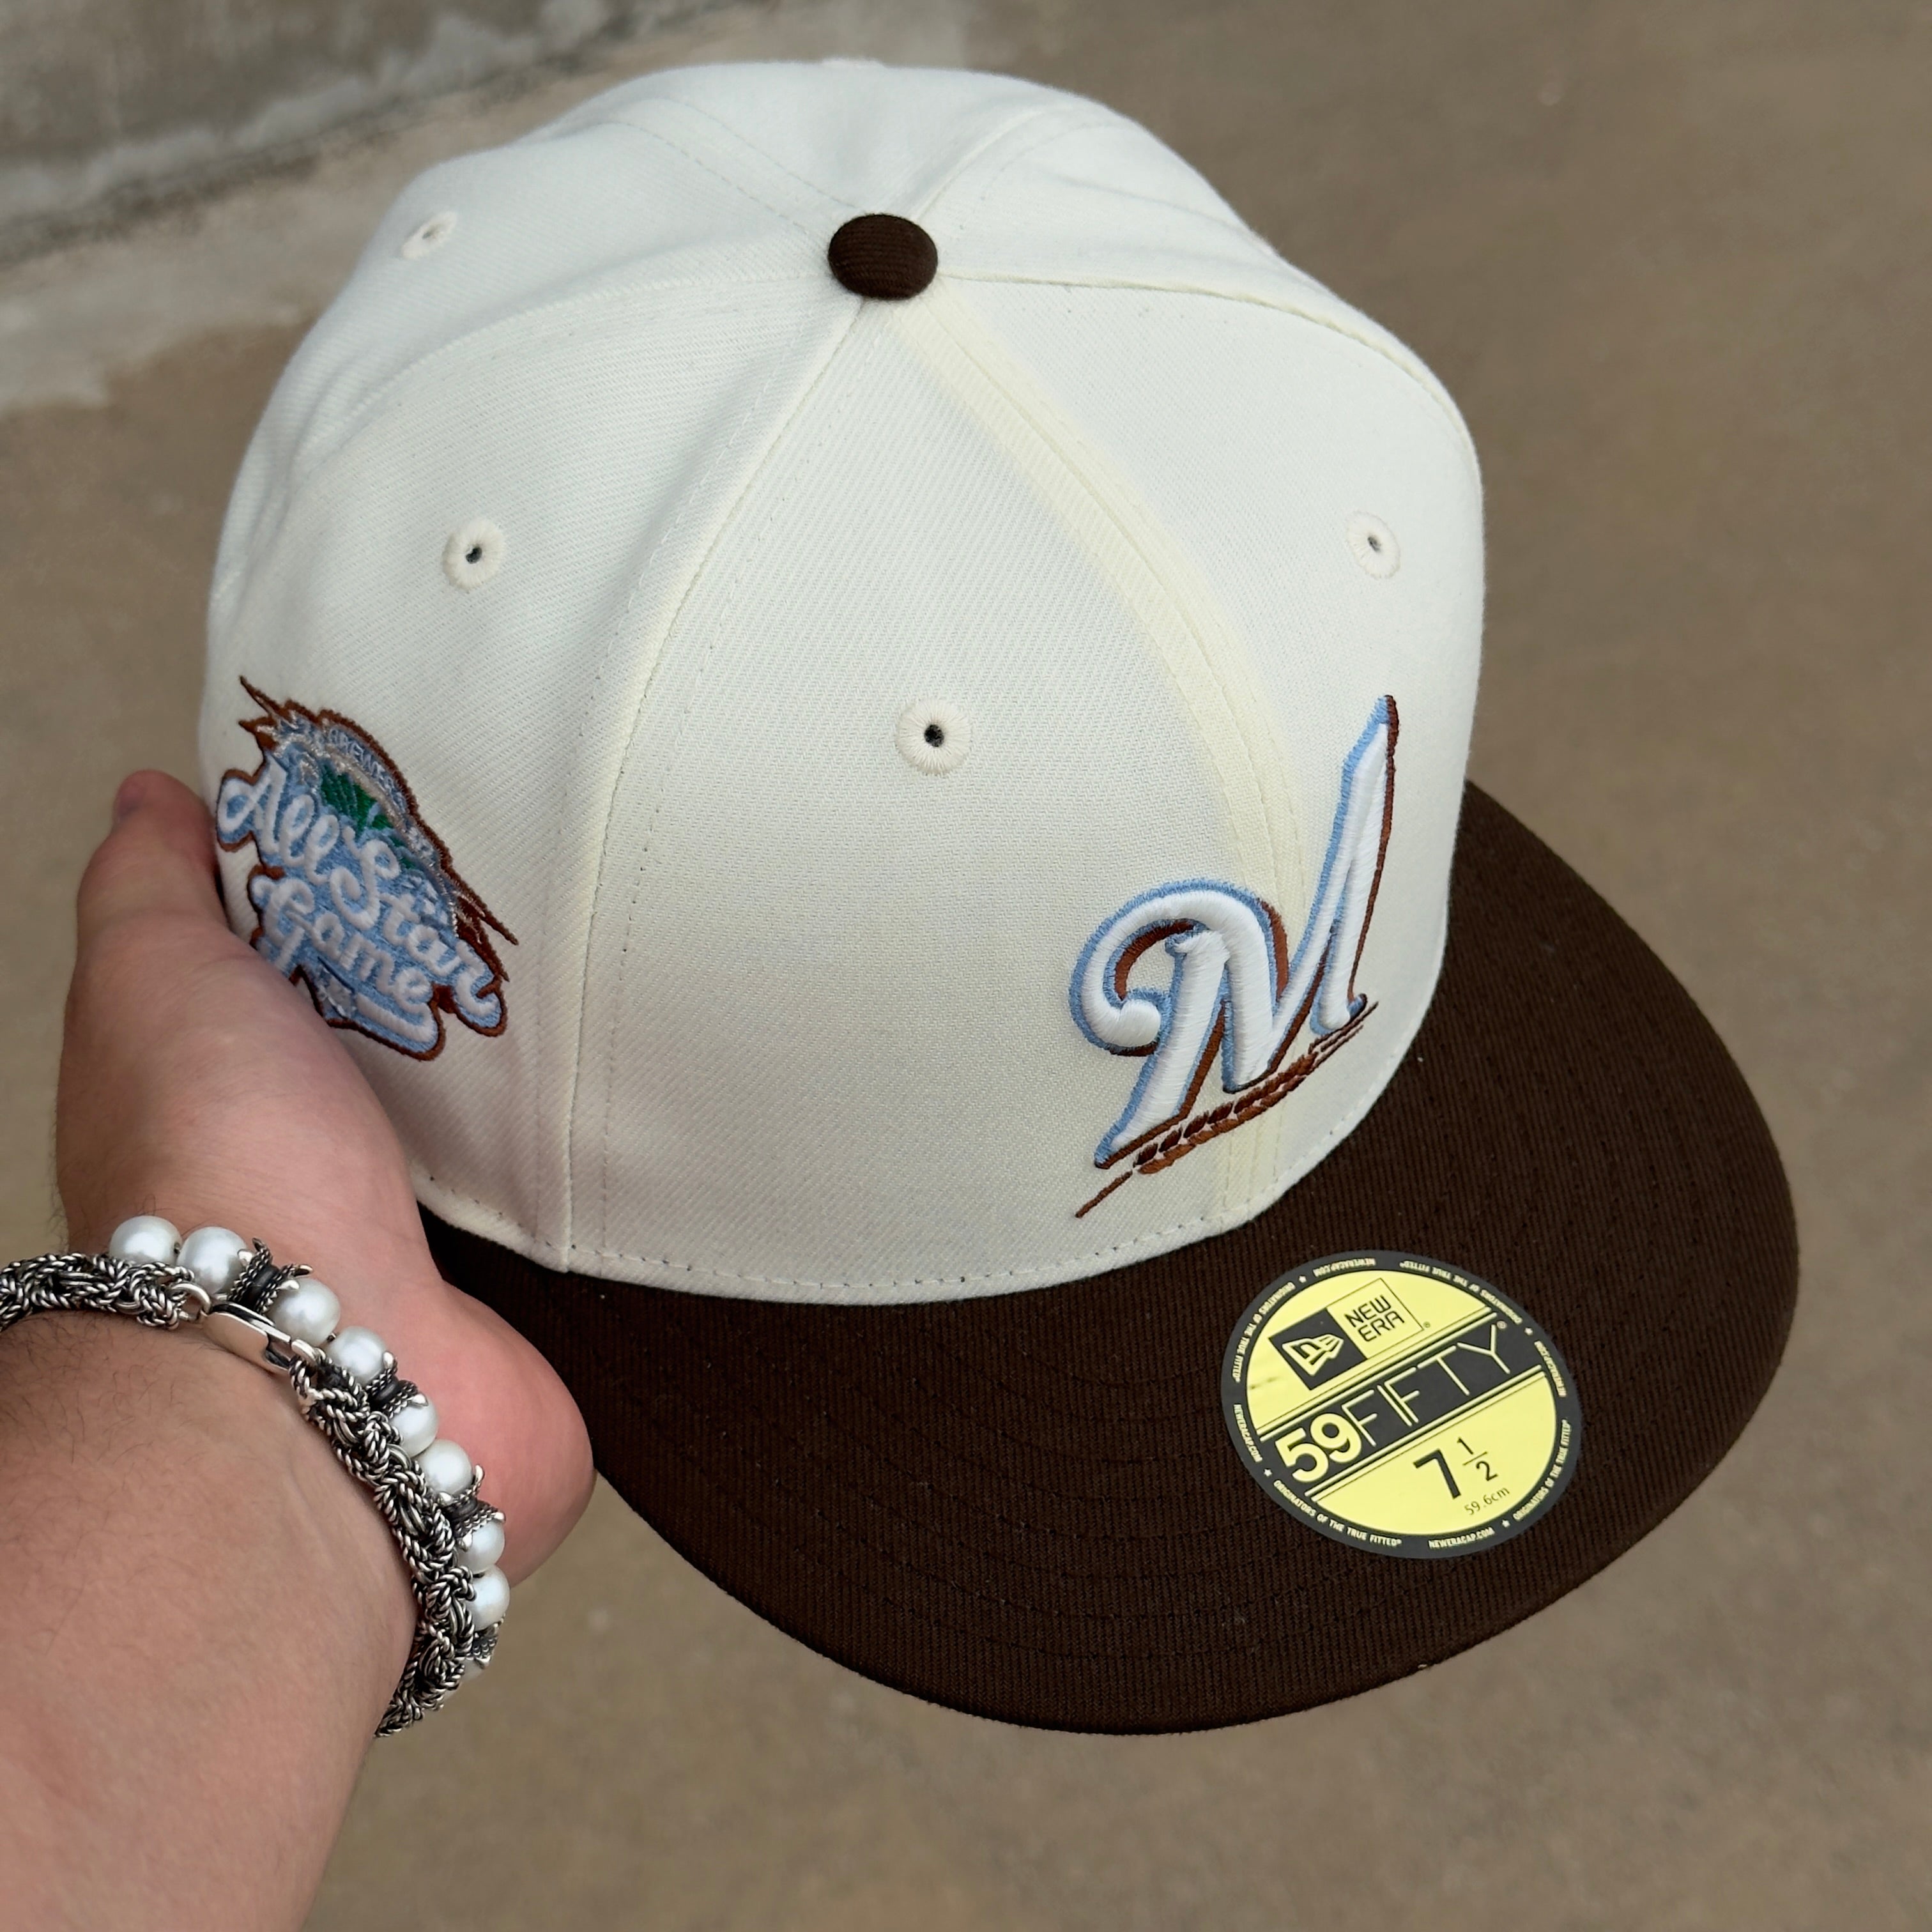 1/2 NEW Chrome Milwaukee Brewers All Star Game 59fifty New Era Fitted Hat Cap